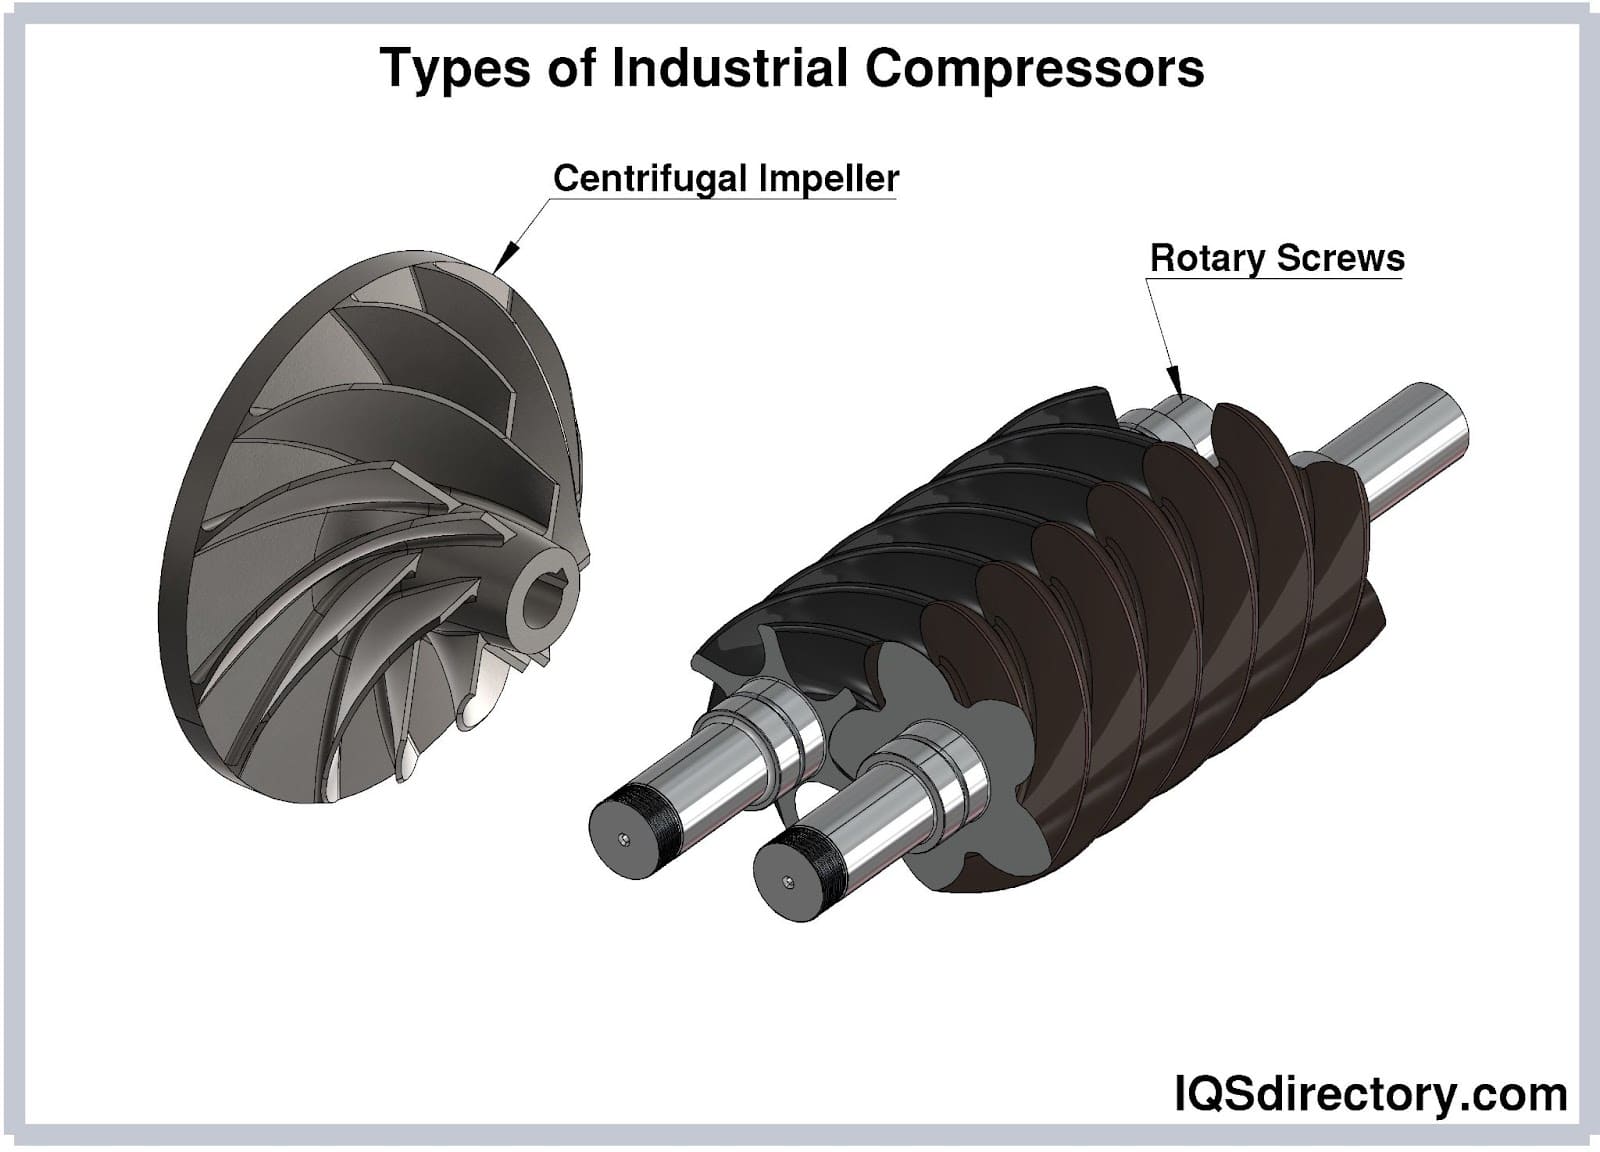 Types of Industrial Compressors